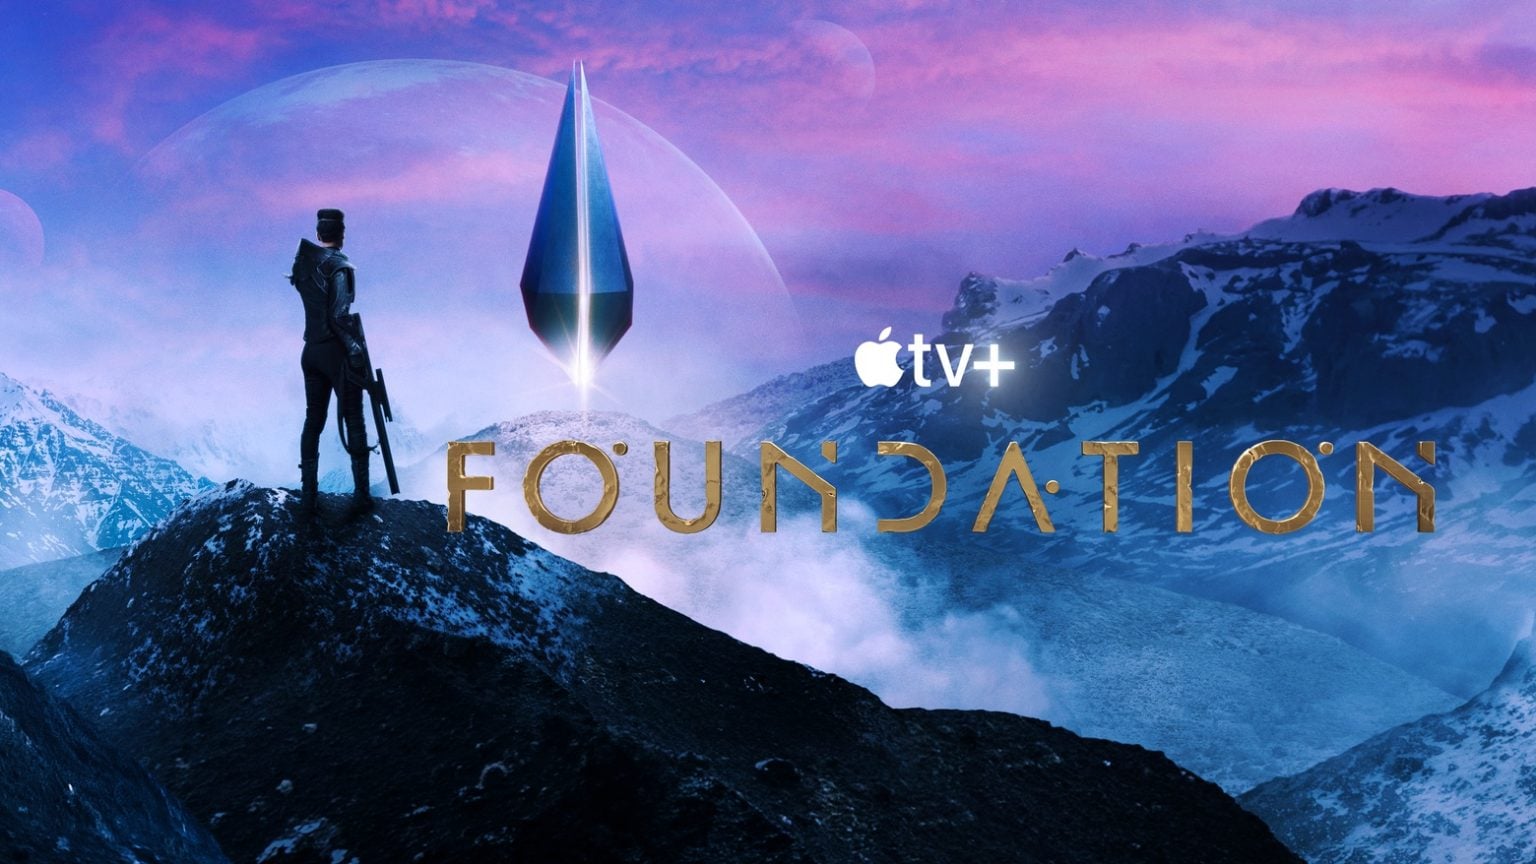 See the amazing world-building in second trailer for Apple TV+’s epic ‘Foundation’